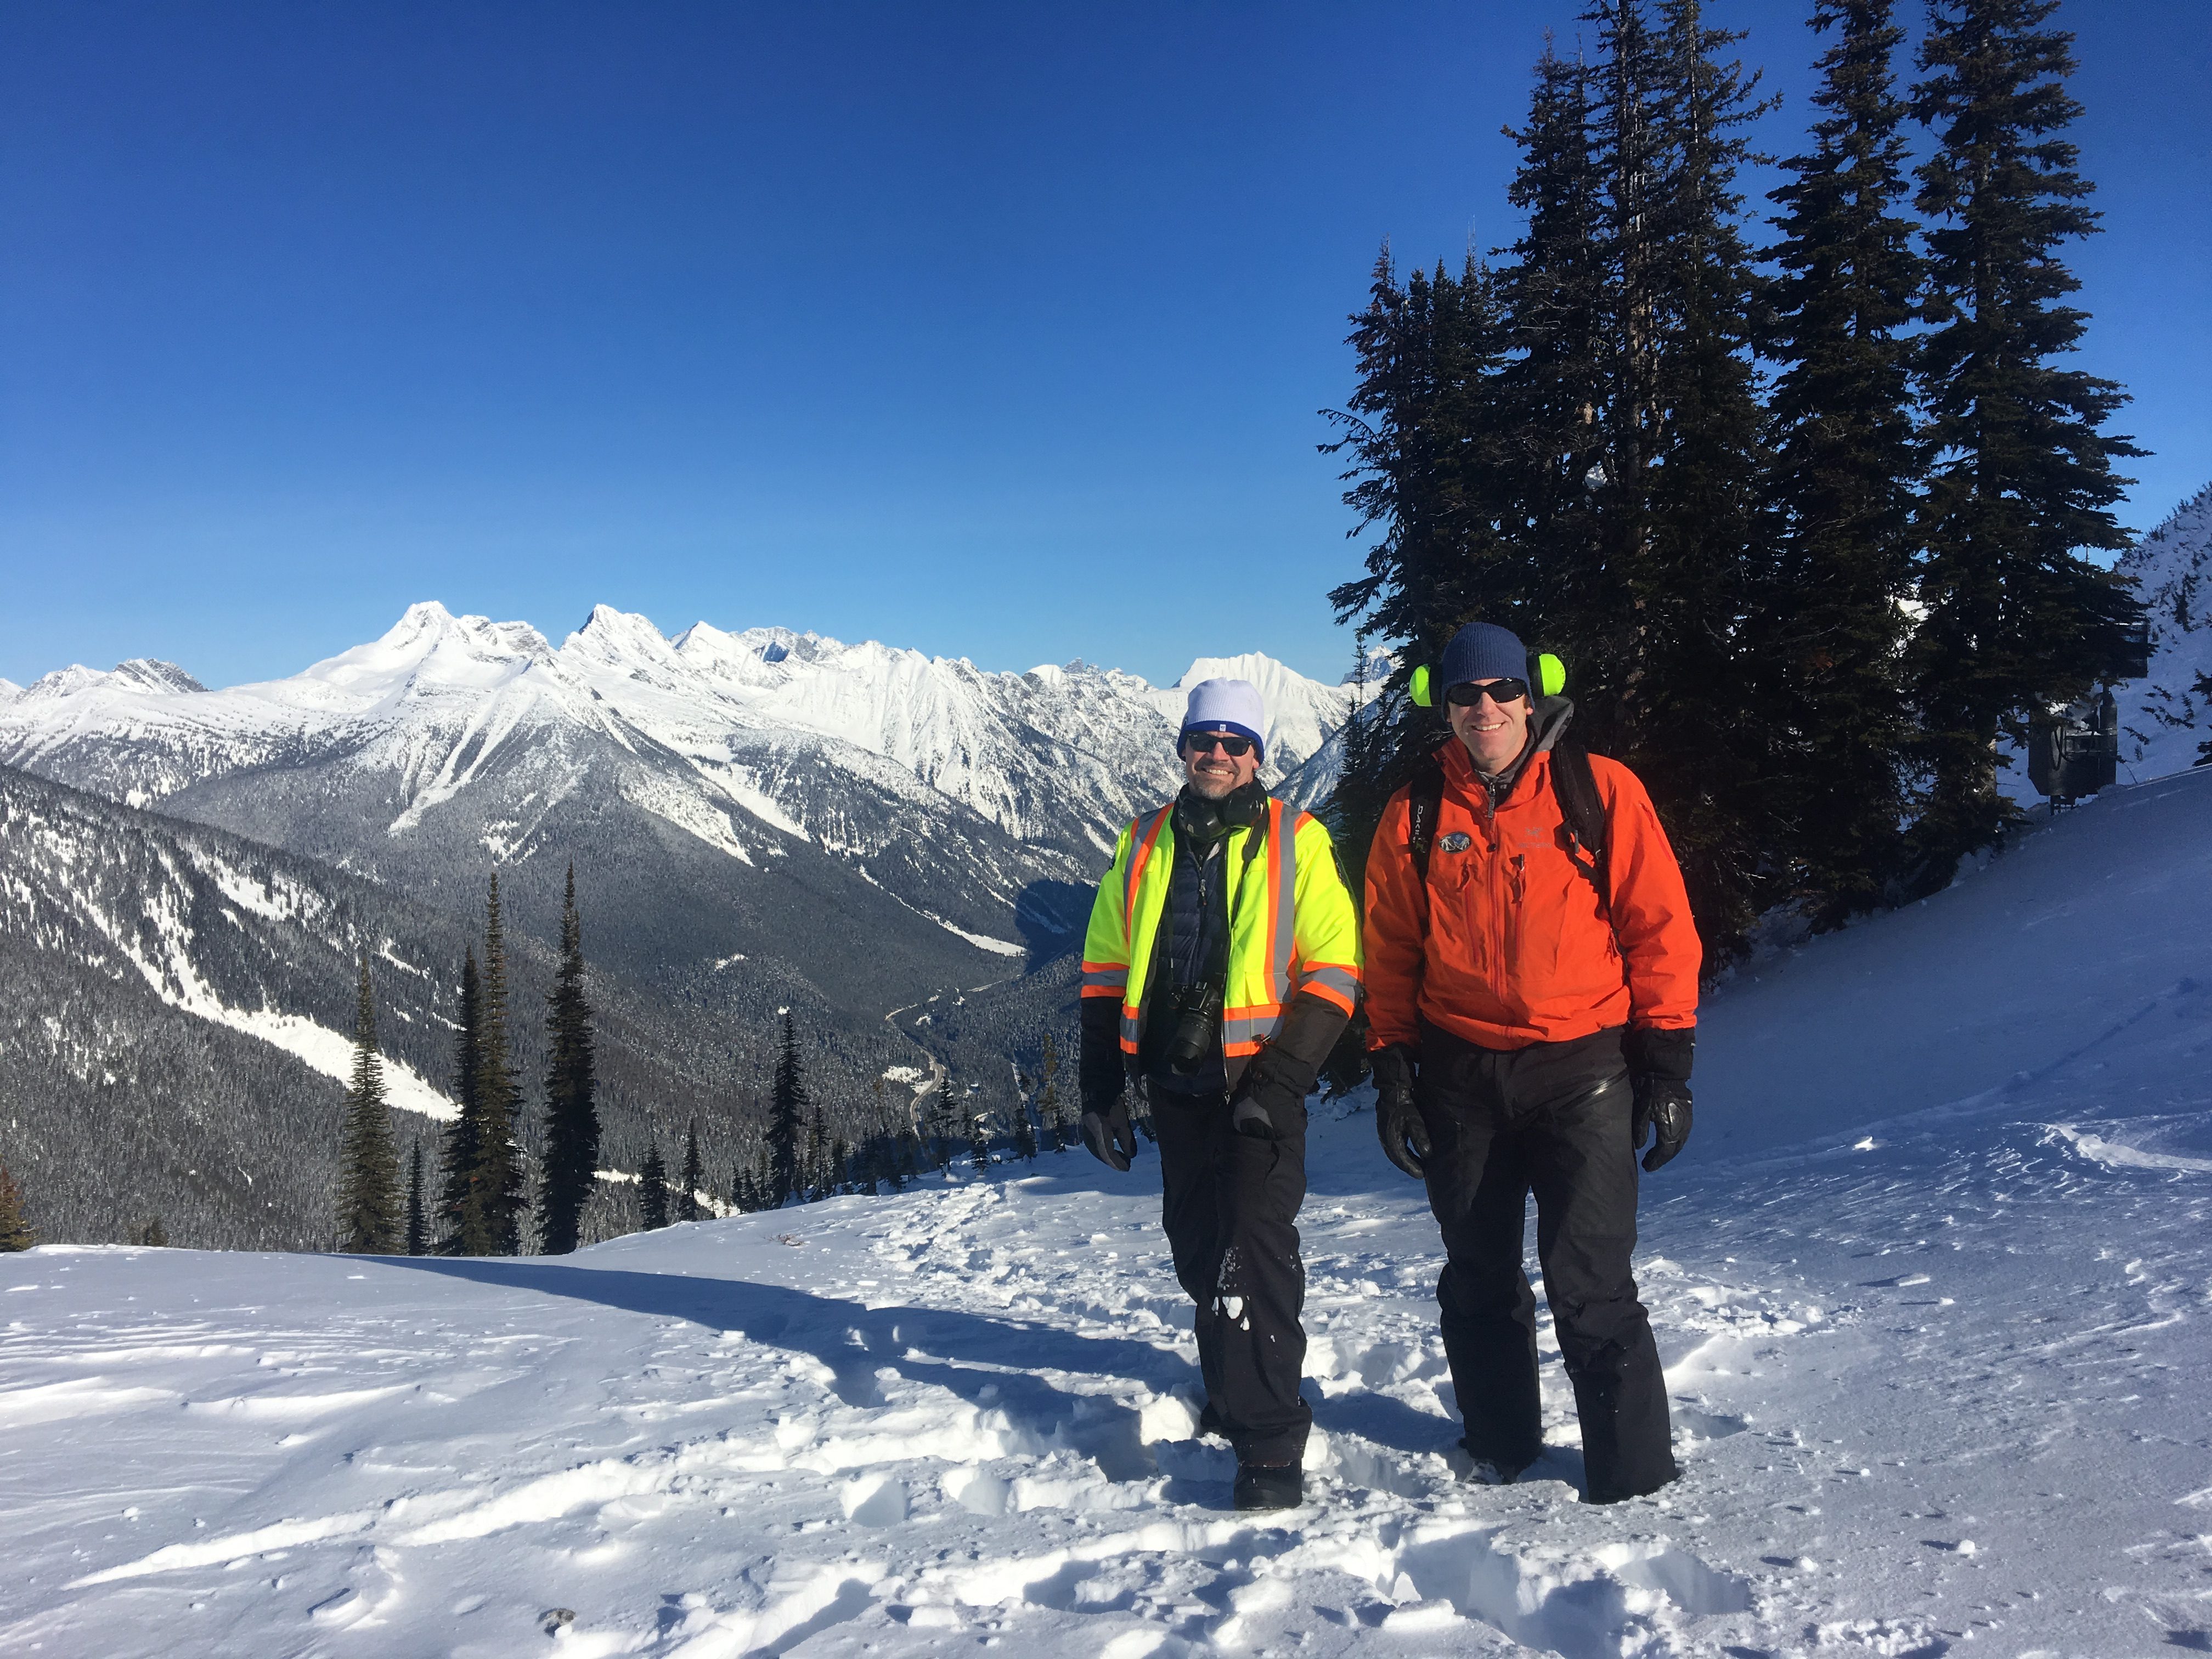 Ministry district manager and avalanche technician surveying snow